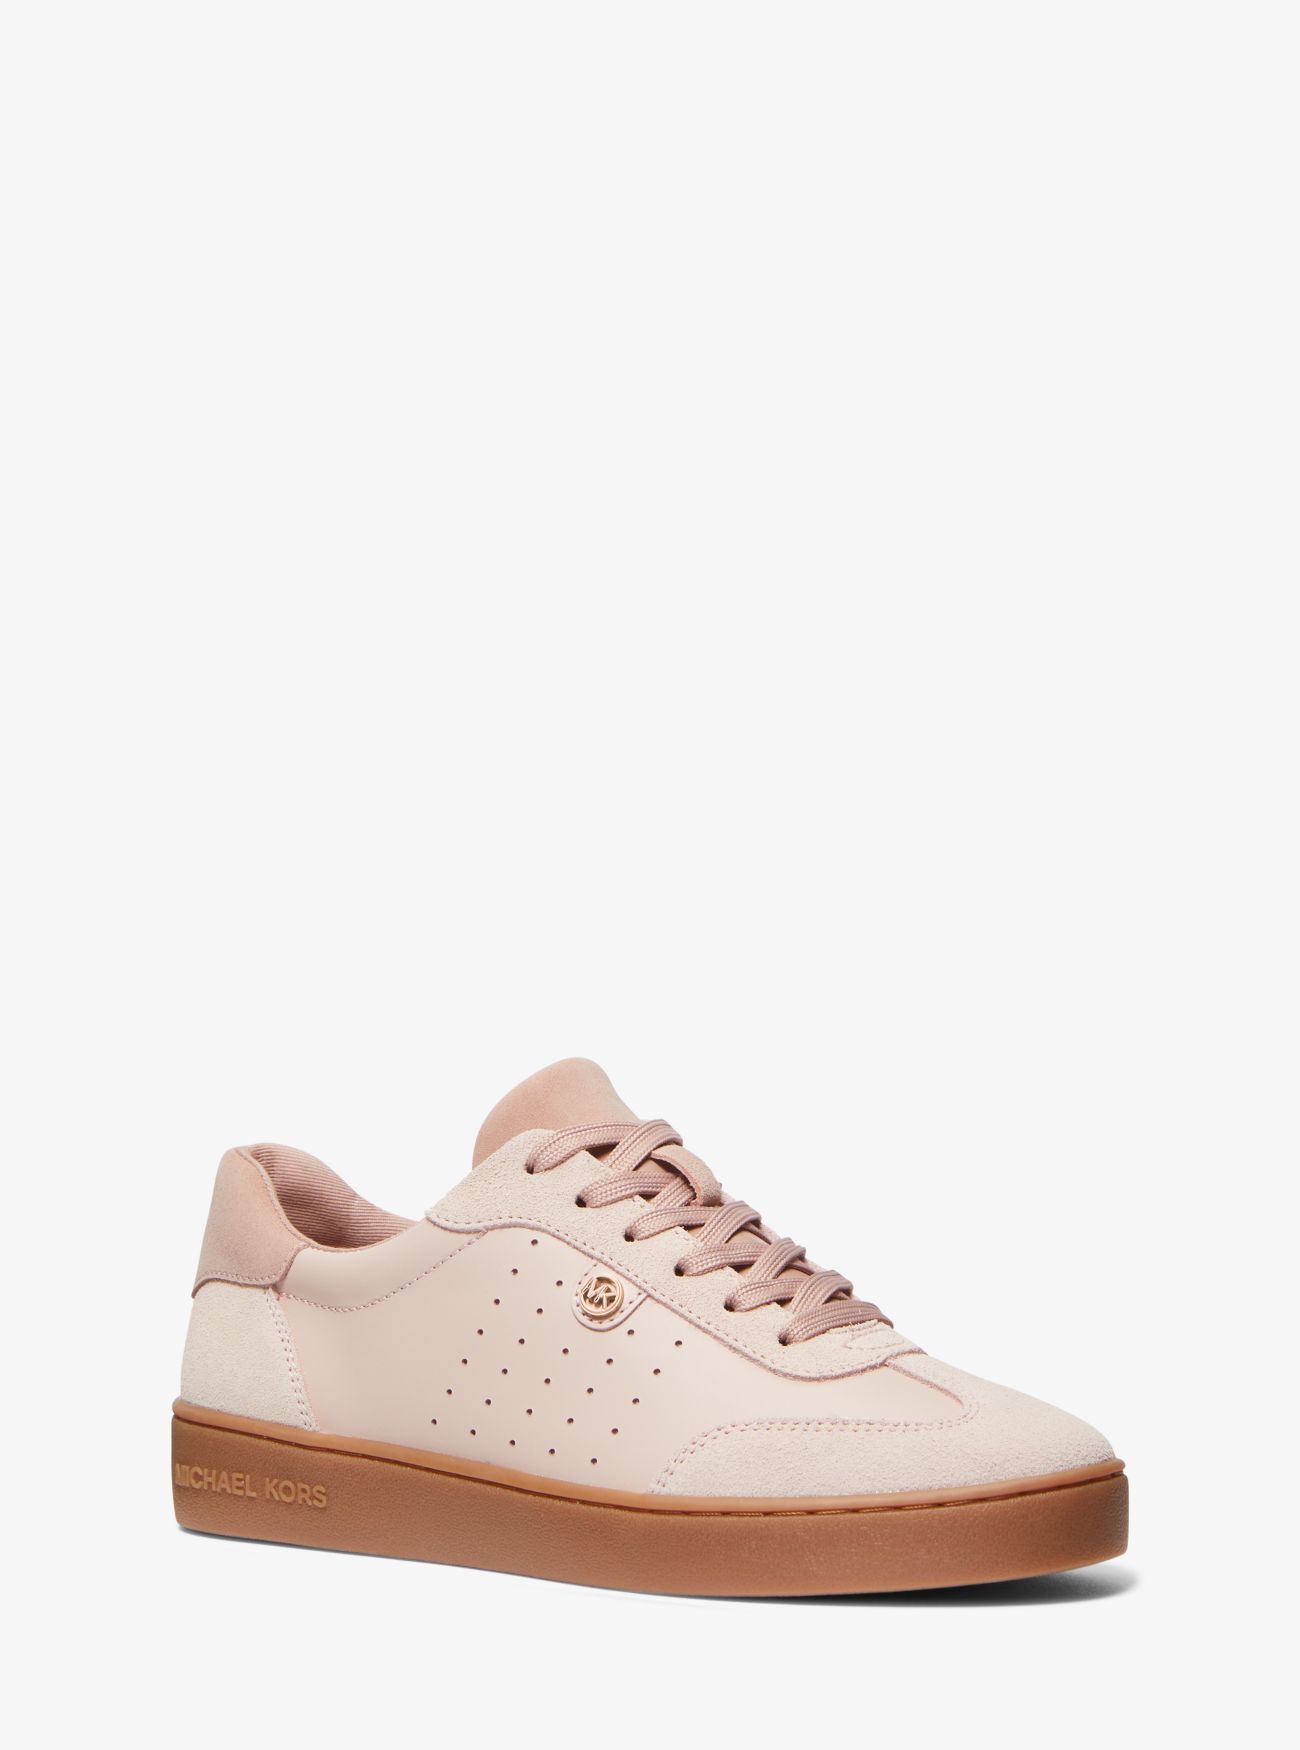 MK Scotty Leather Trainers - Soft Pink - Michael Kors